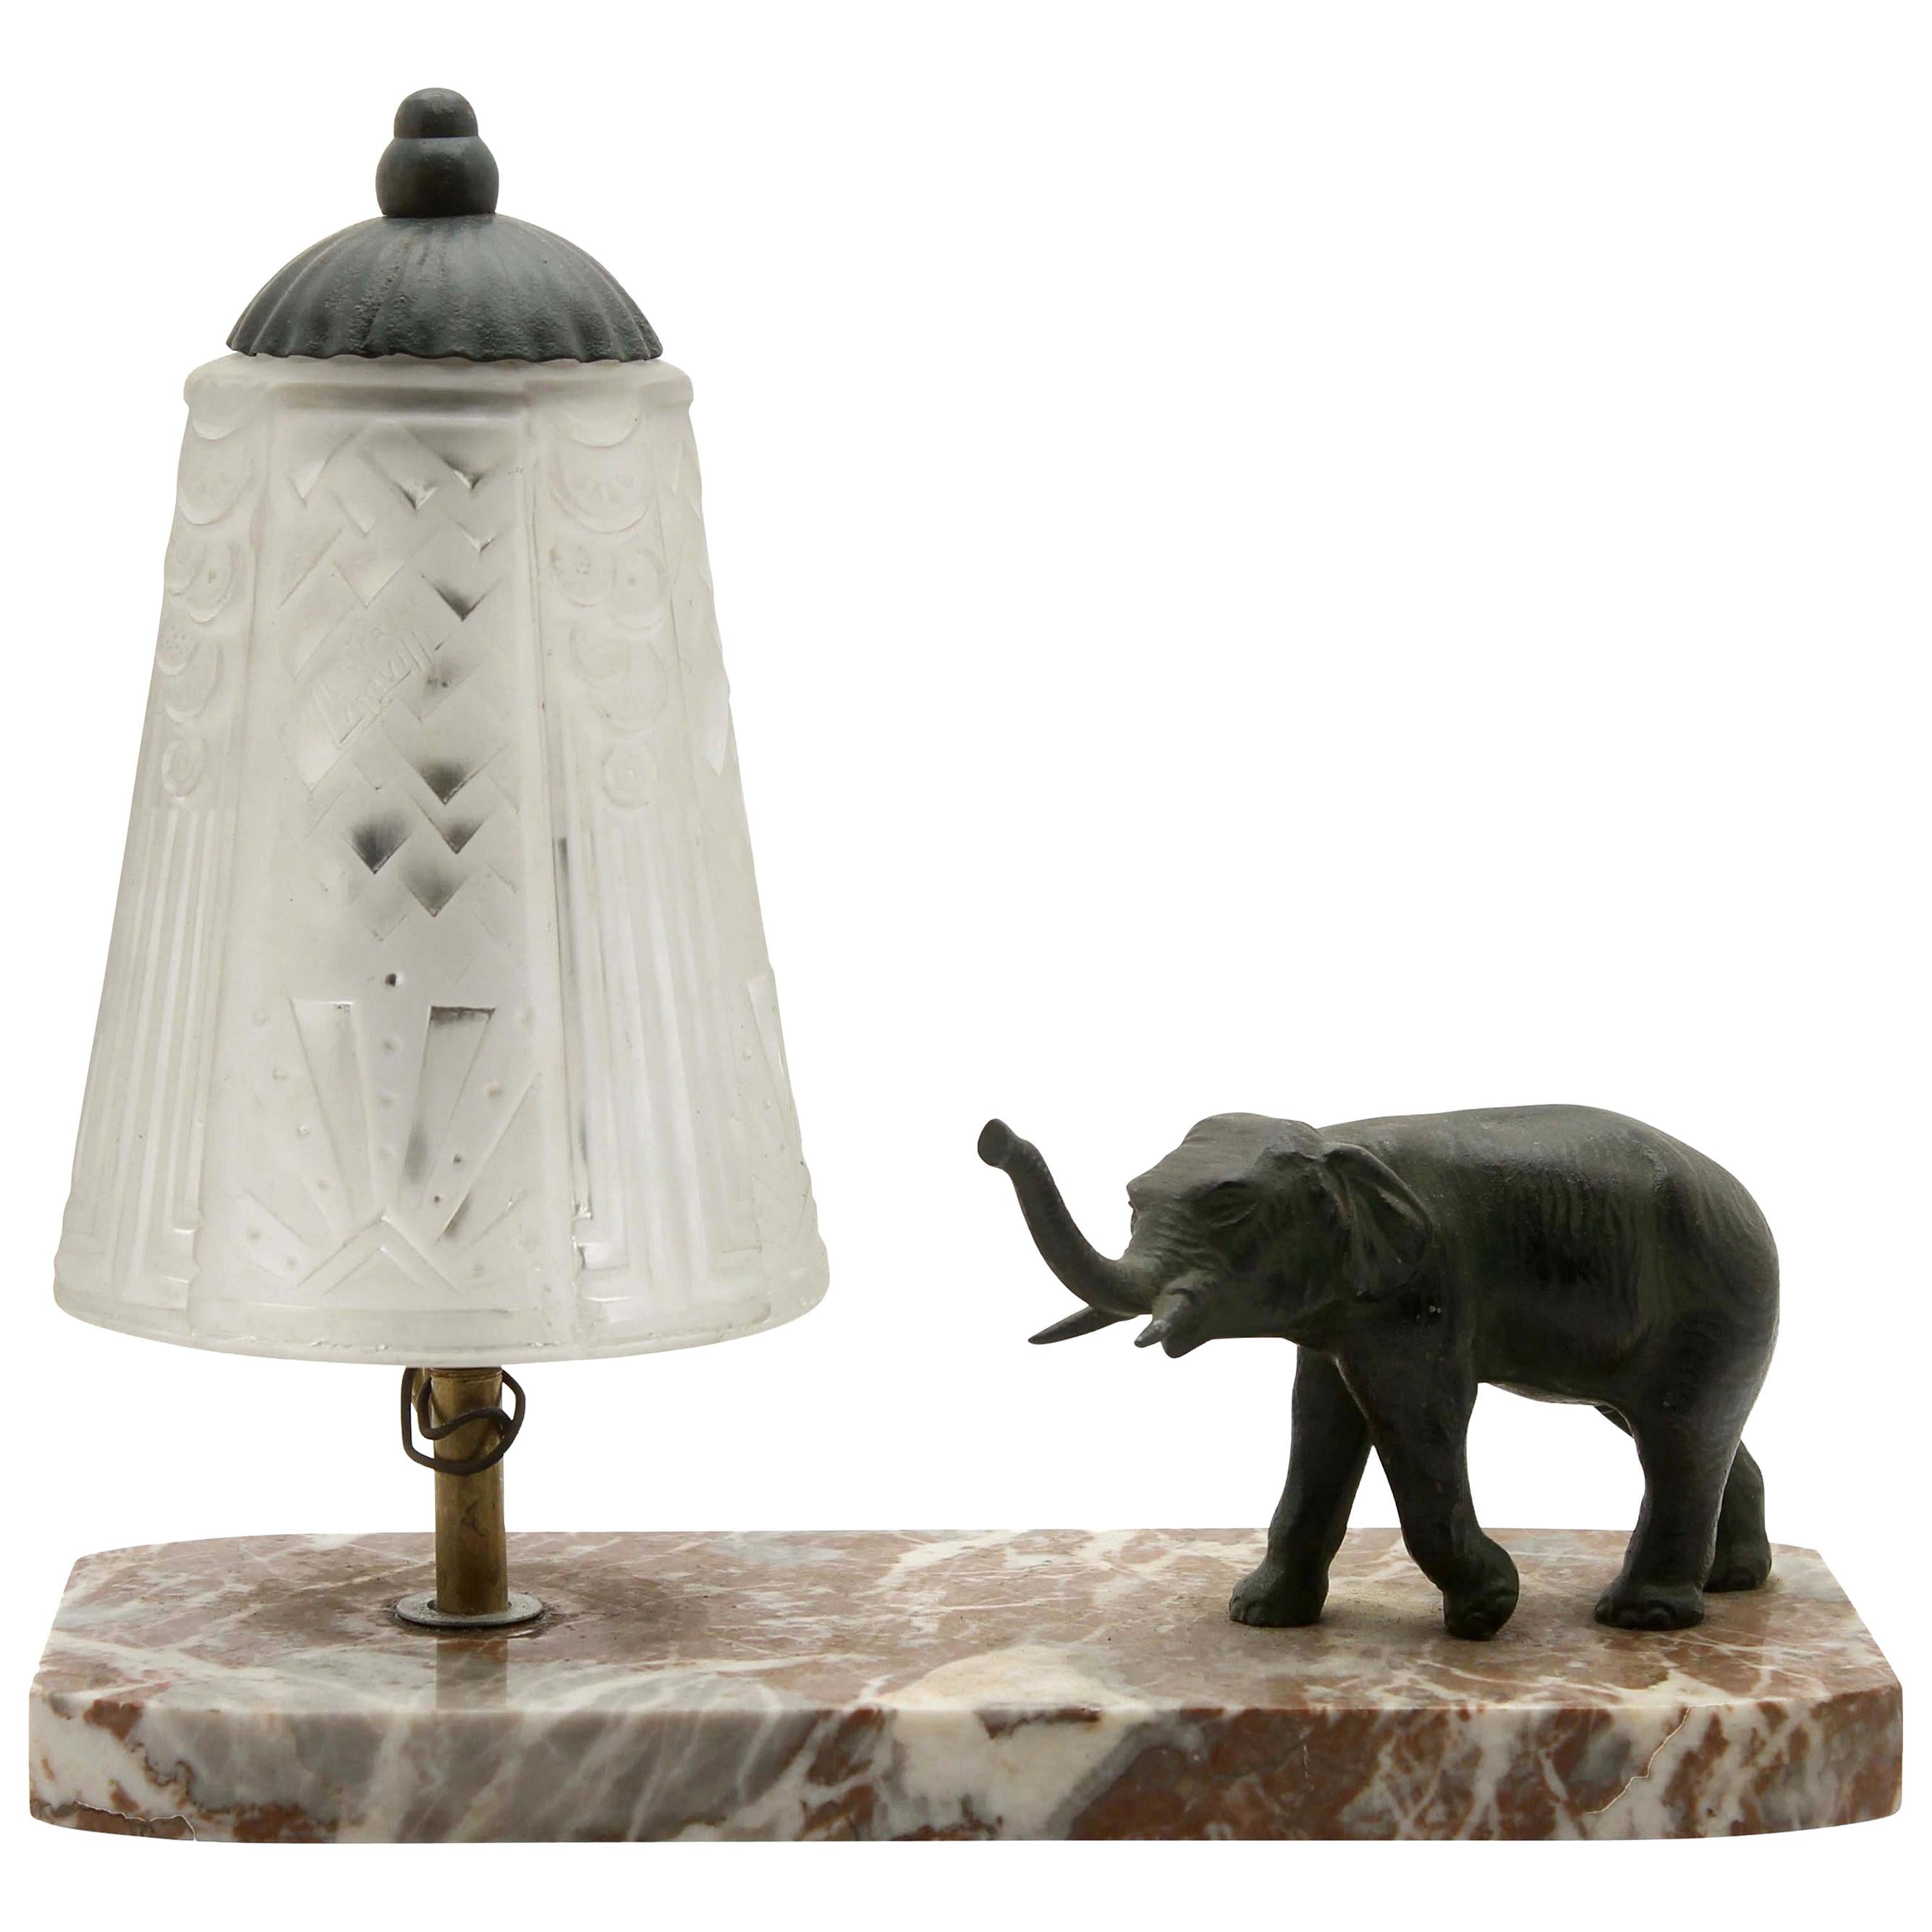 French Art Deco Table Lamp Signed by Muller Frères with Bronze Elephant Motif